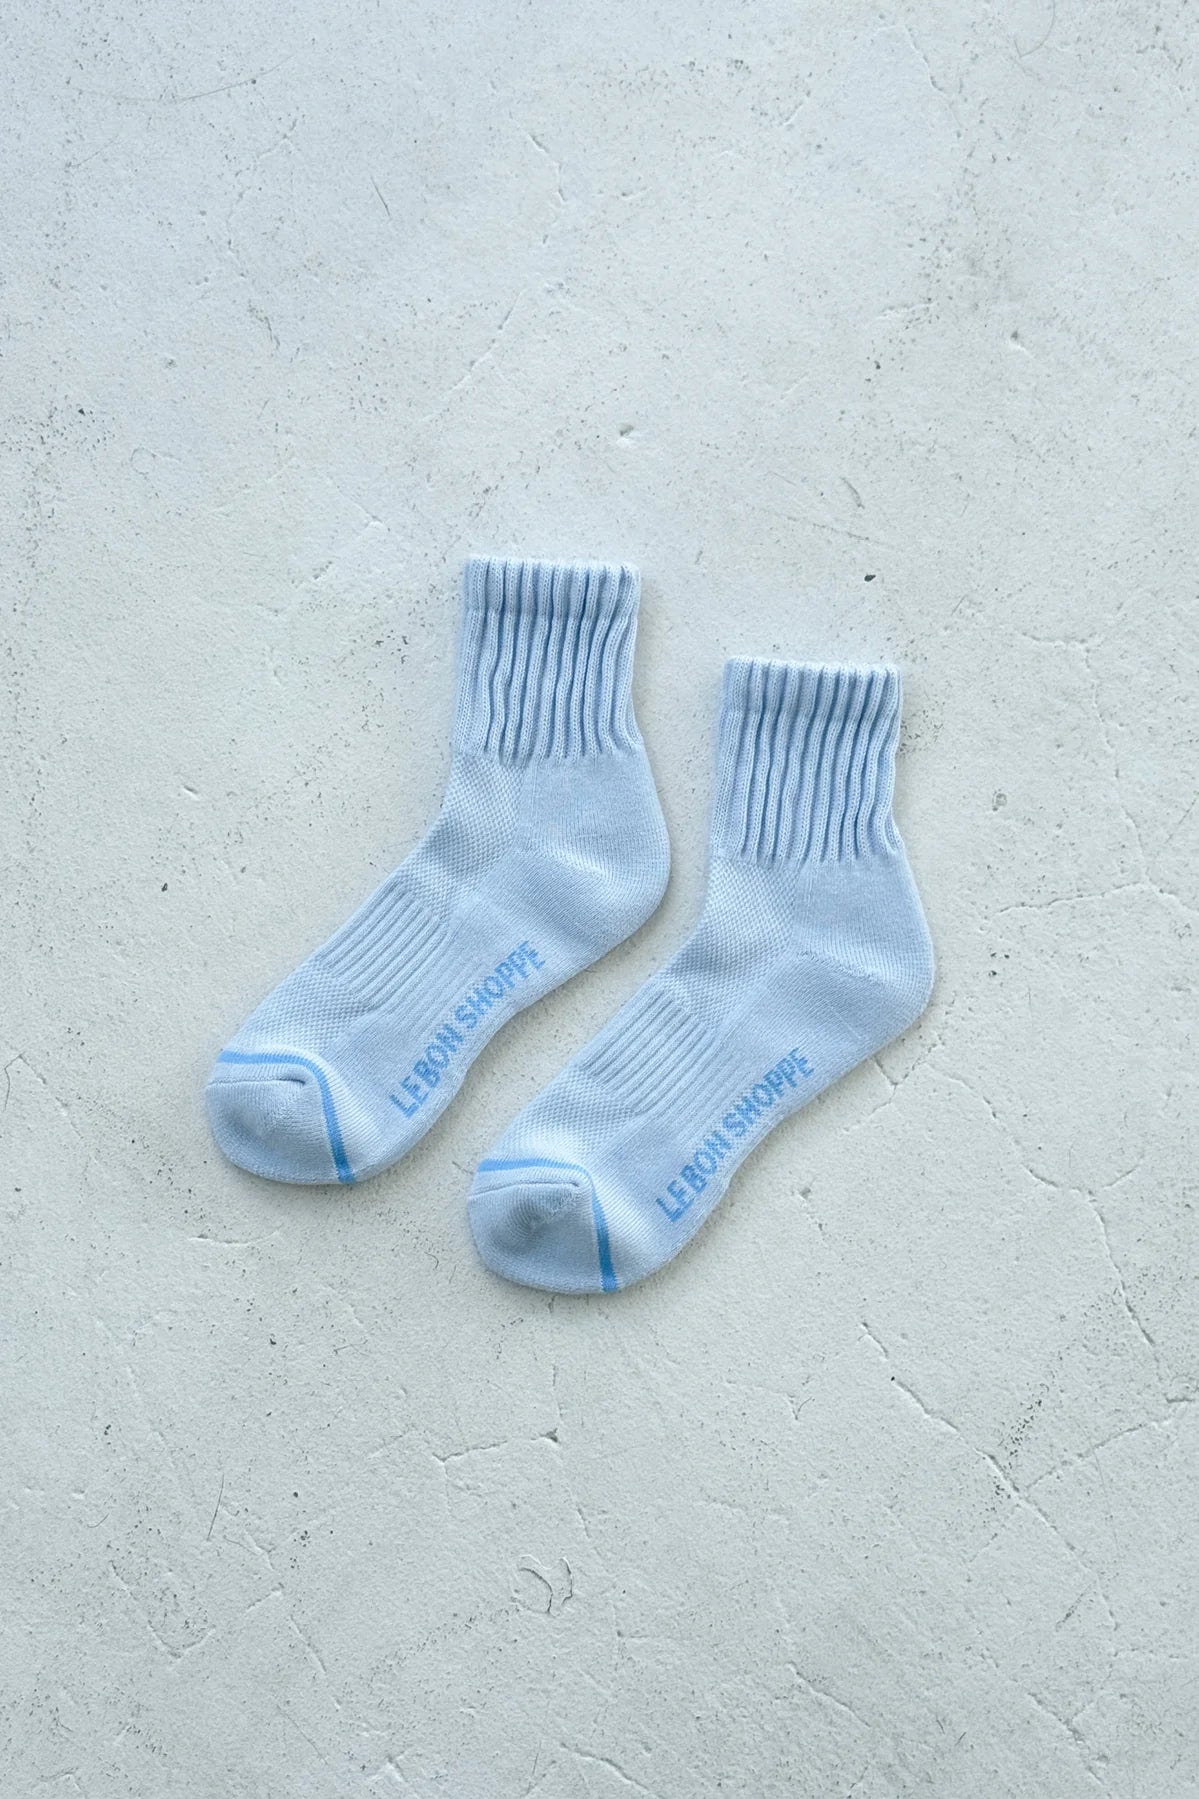 Le Bon Shoppe Swing sockS baby blue thicker ribbed leg bubble | PIPE AND ROW